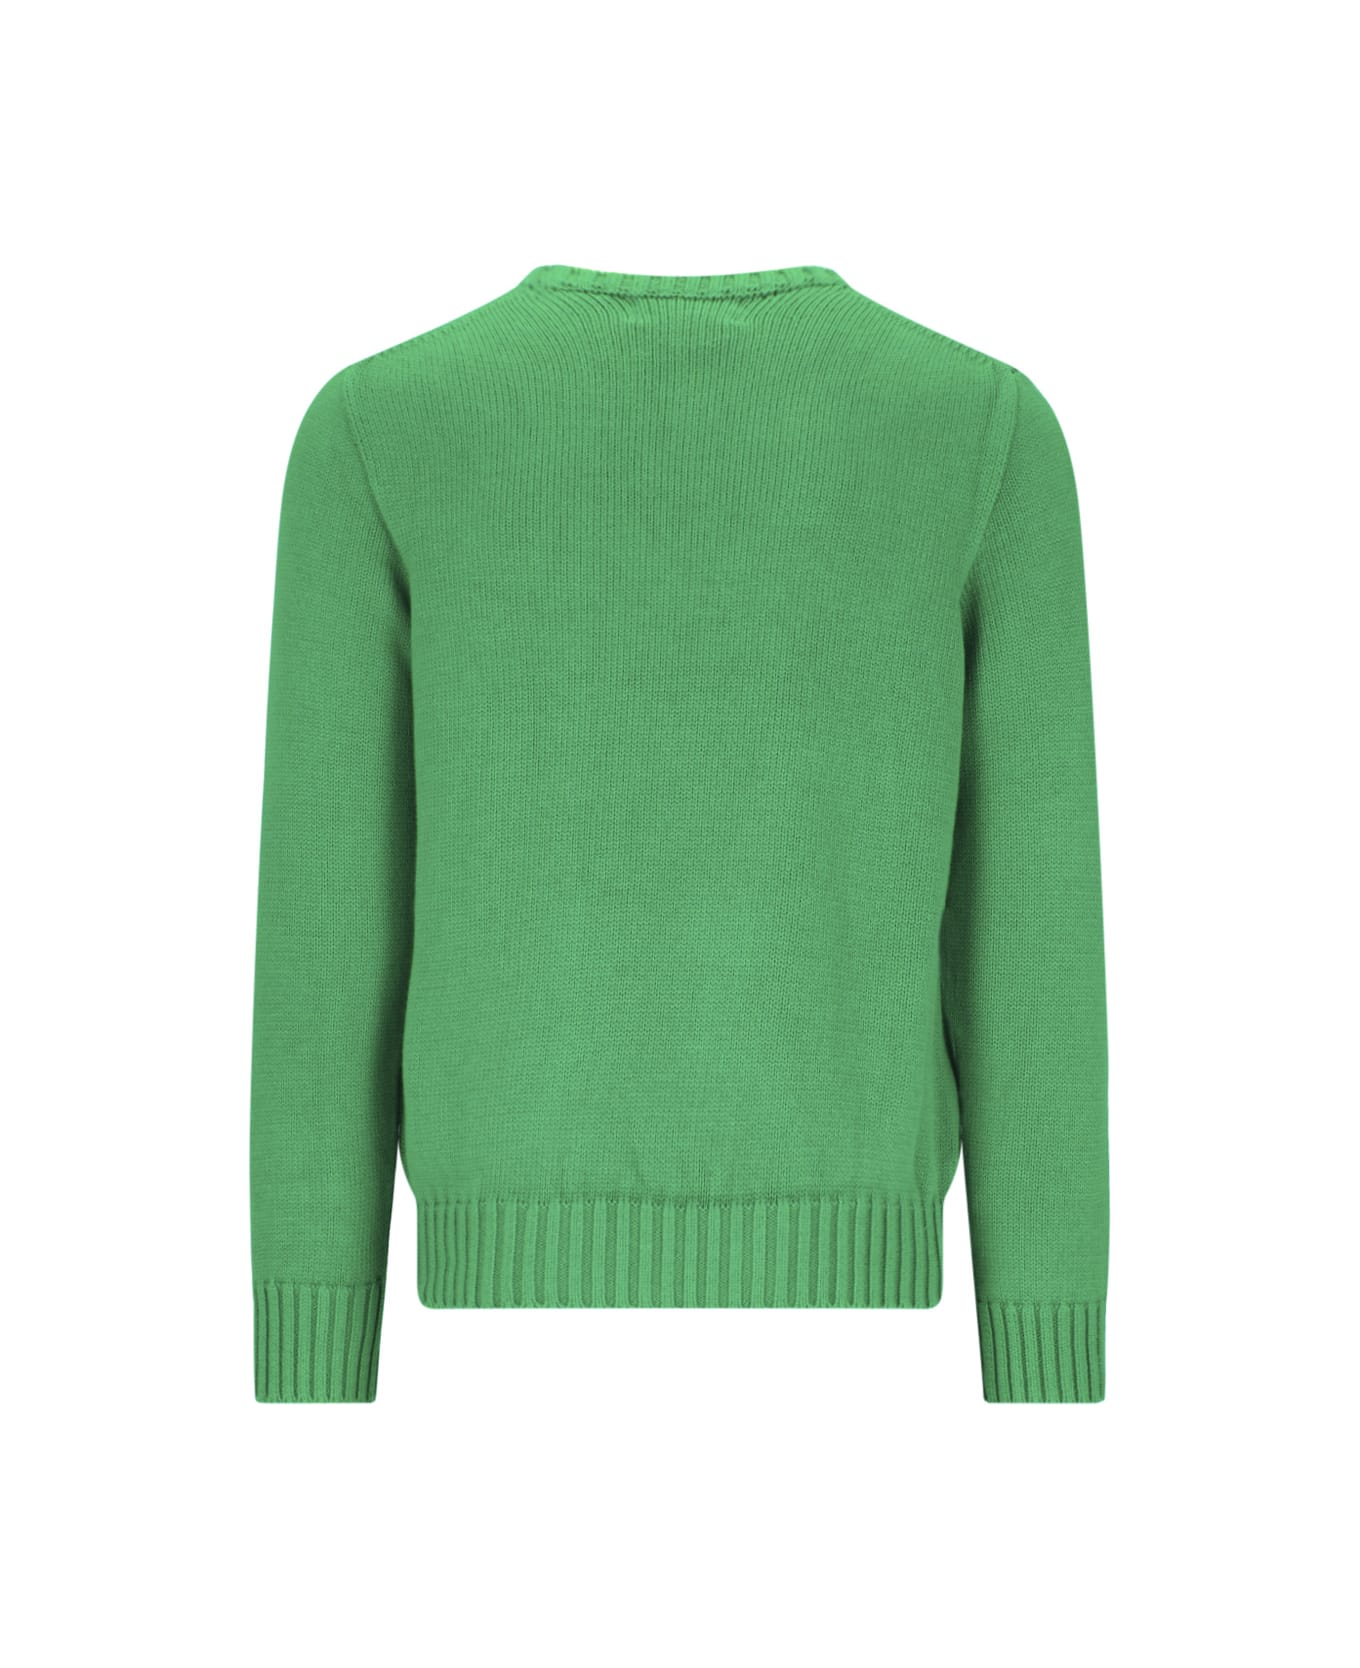 Polo Ralph Lauren Iconic Embroidery Sweater - GREEN ニットウェア